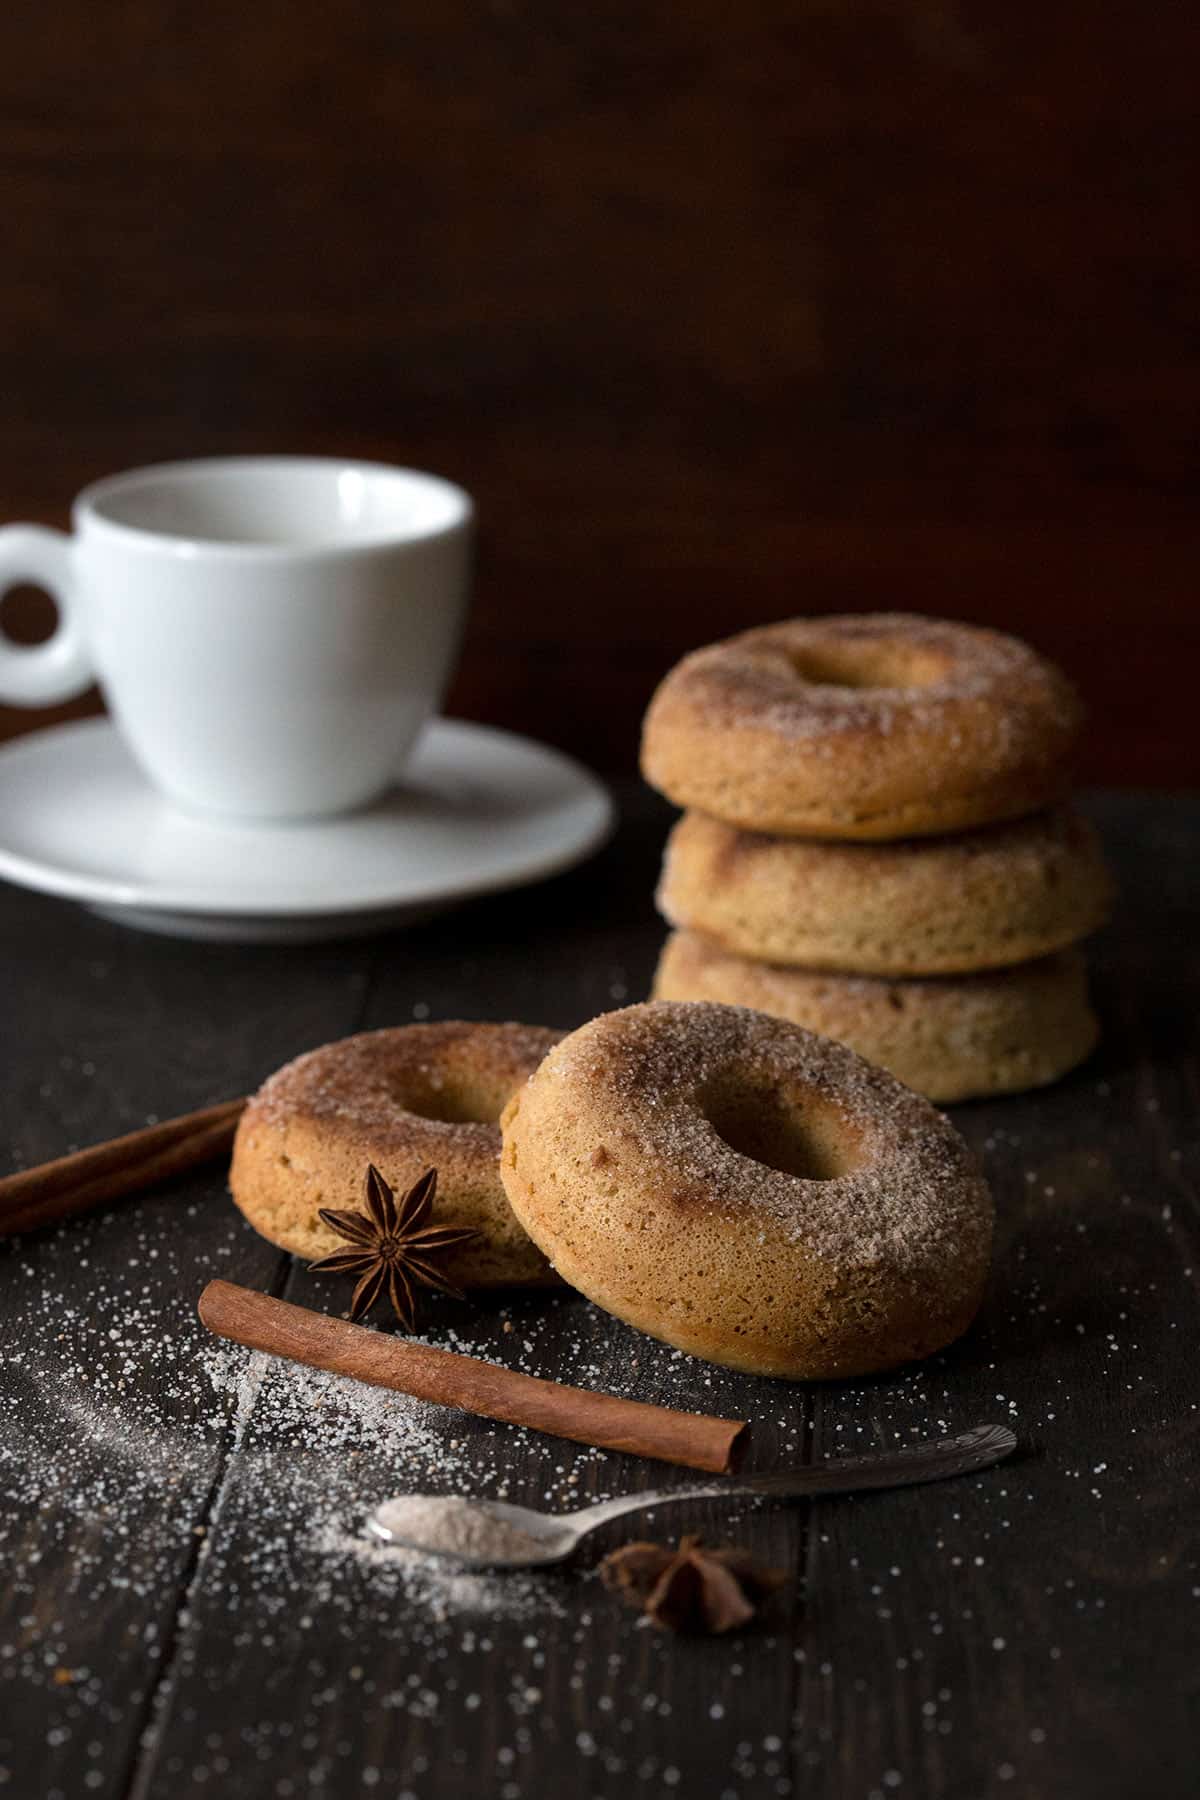 Keto Almond Flour Donuts with Cinnamon Sugar Coating on a brown table with a cup of coffee in the background.